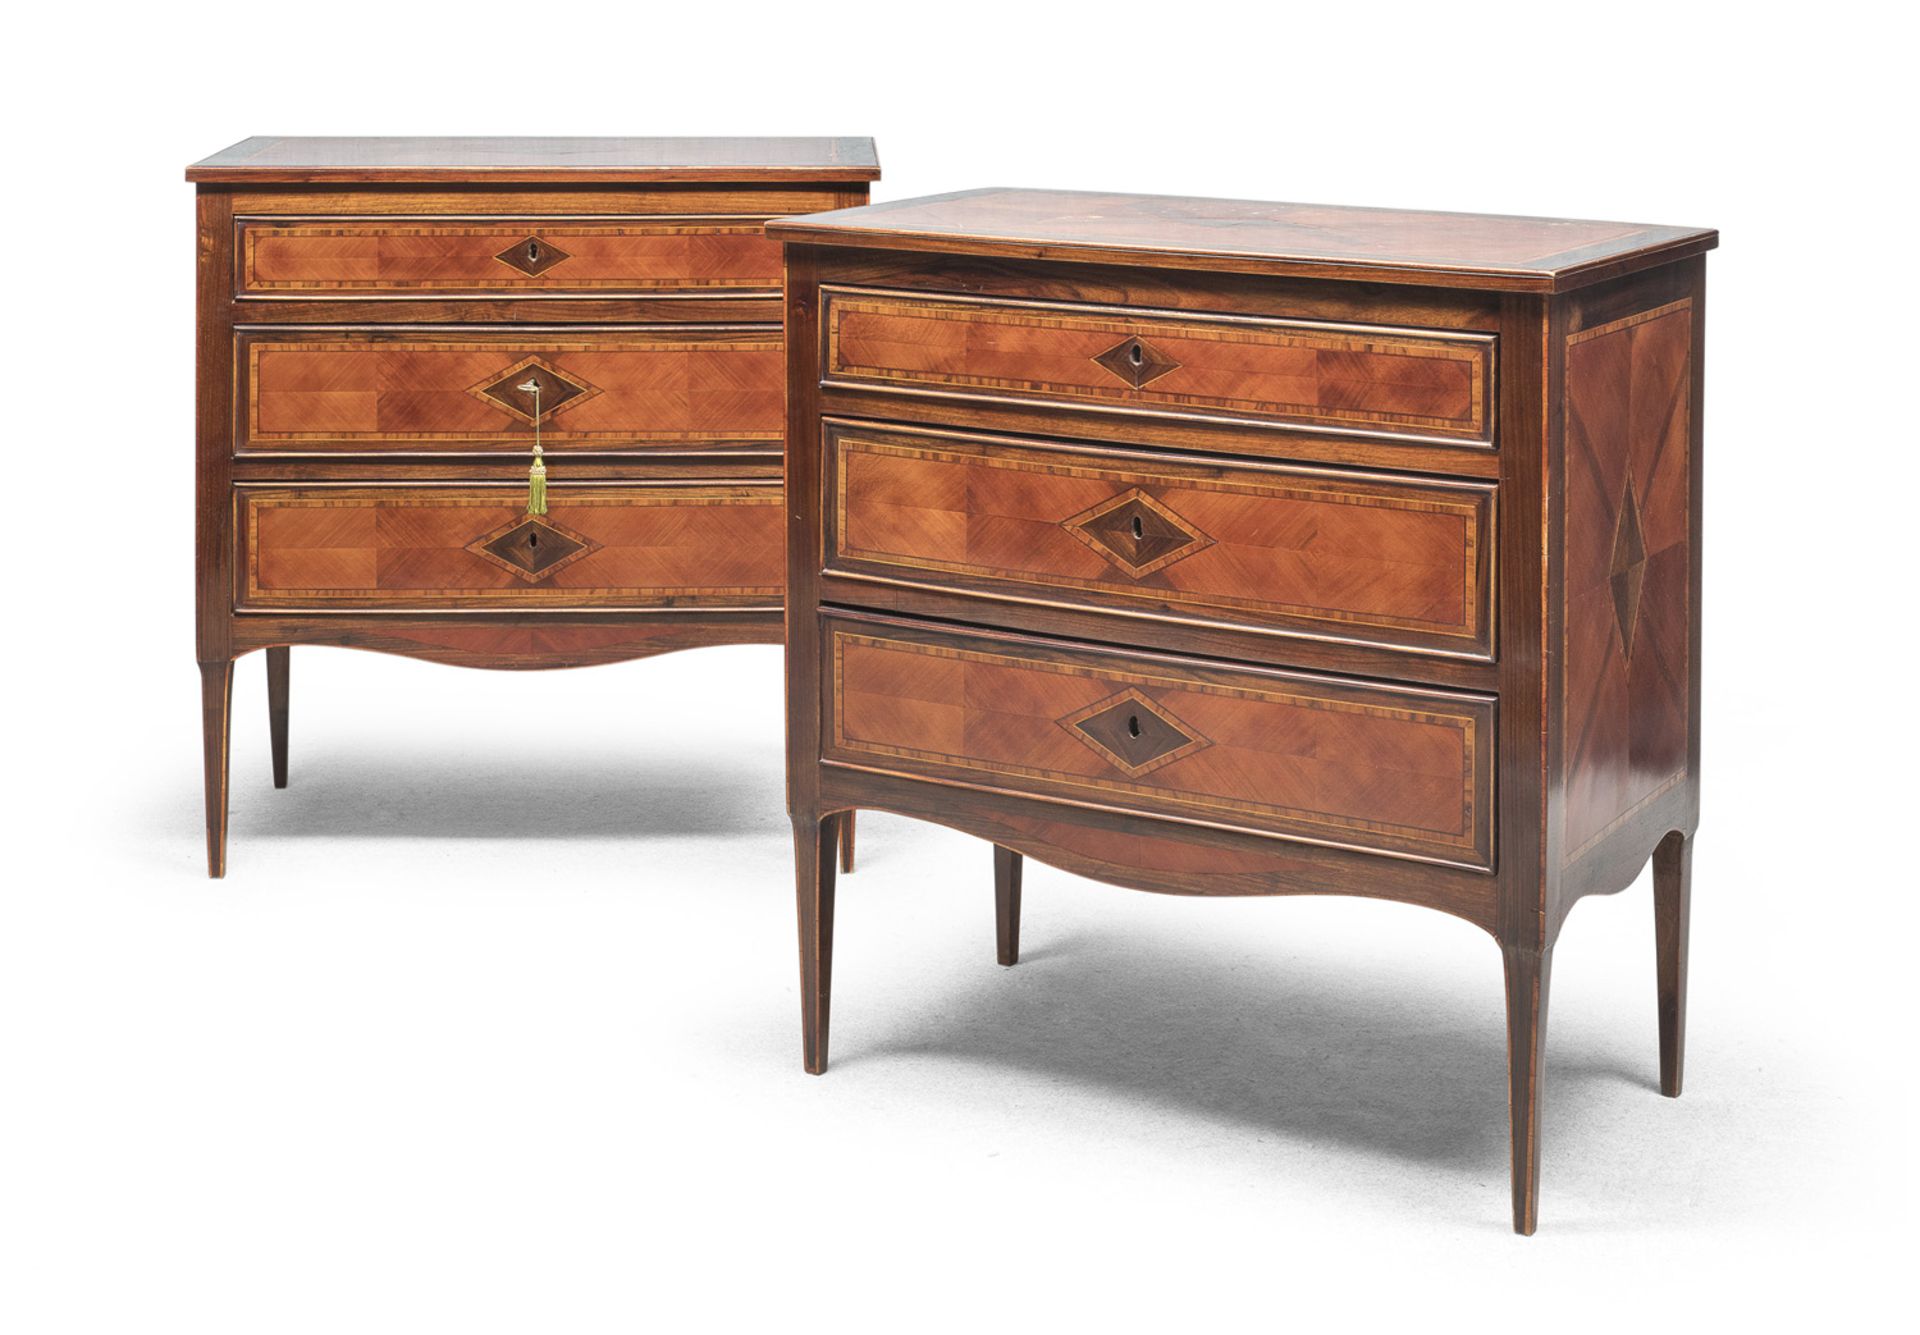 PAIR OF SMALL CHESTS OF DRAWERS 19th CENTURY